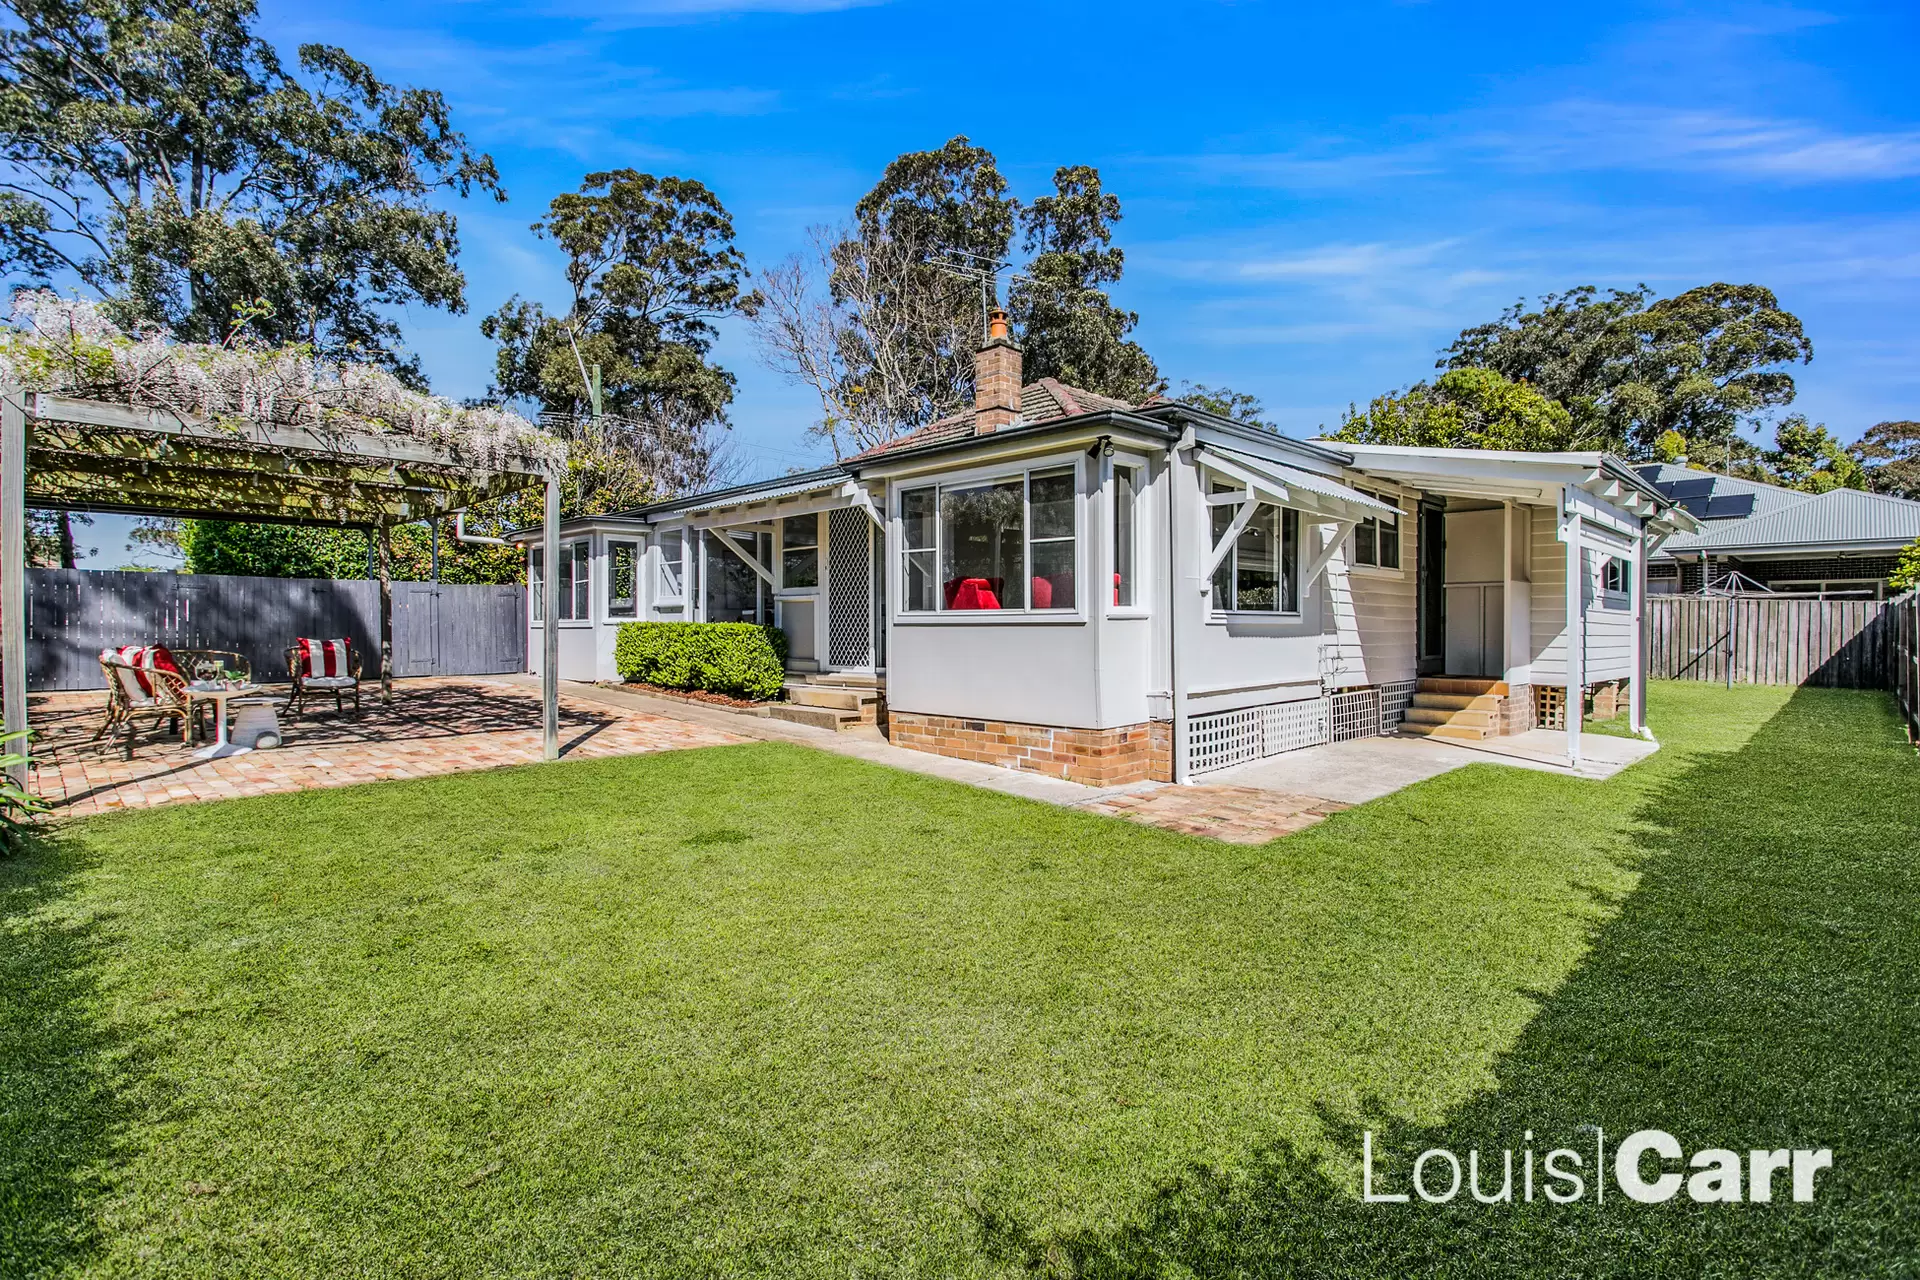 Photo #10: 19 New Line Road, West Pennant Hills - Leased by Louis Carr Real Estate